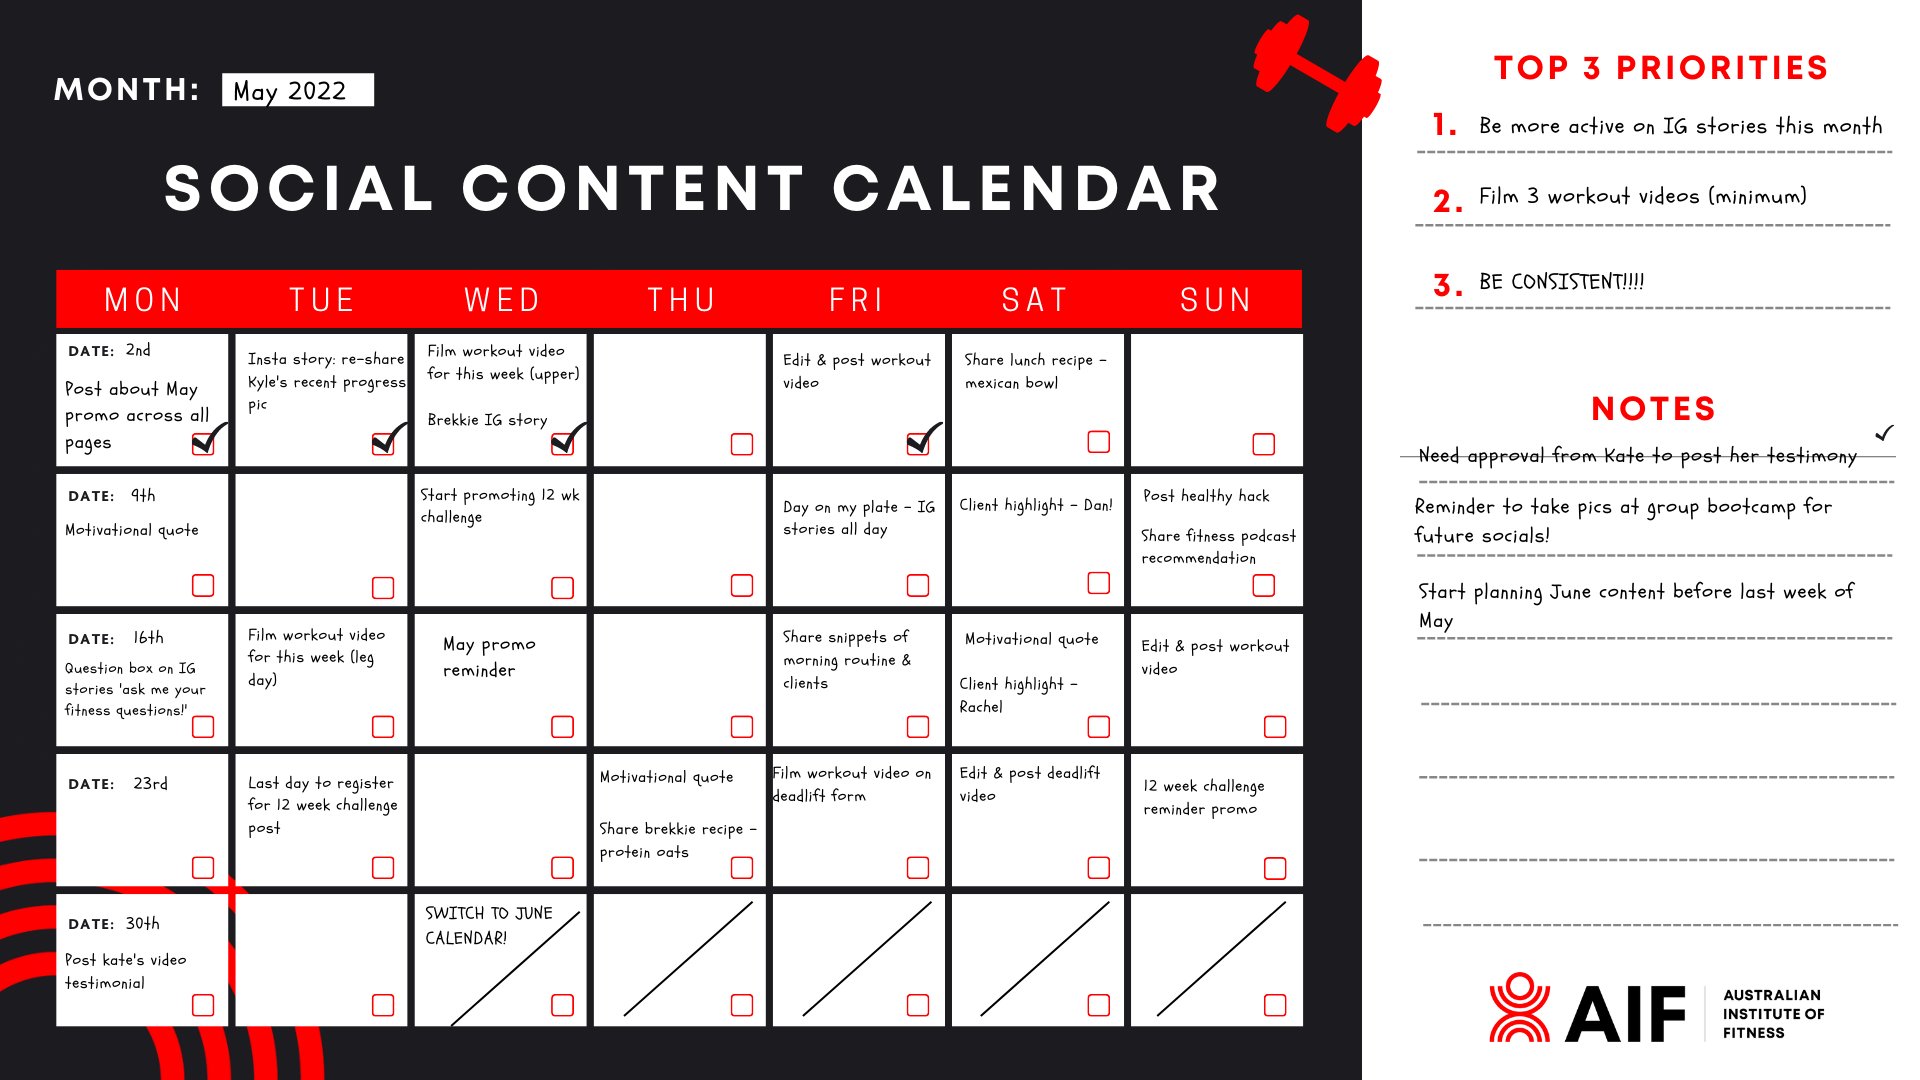 Upgrade your Fitness Business with this Social Content Calendar